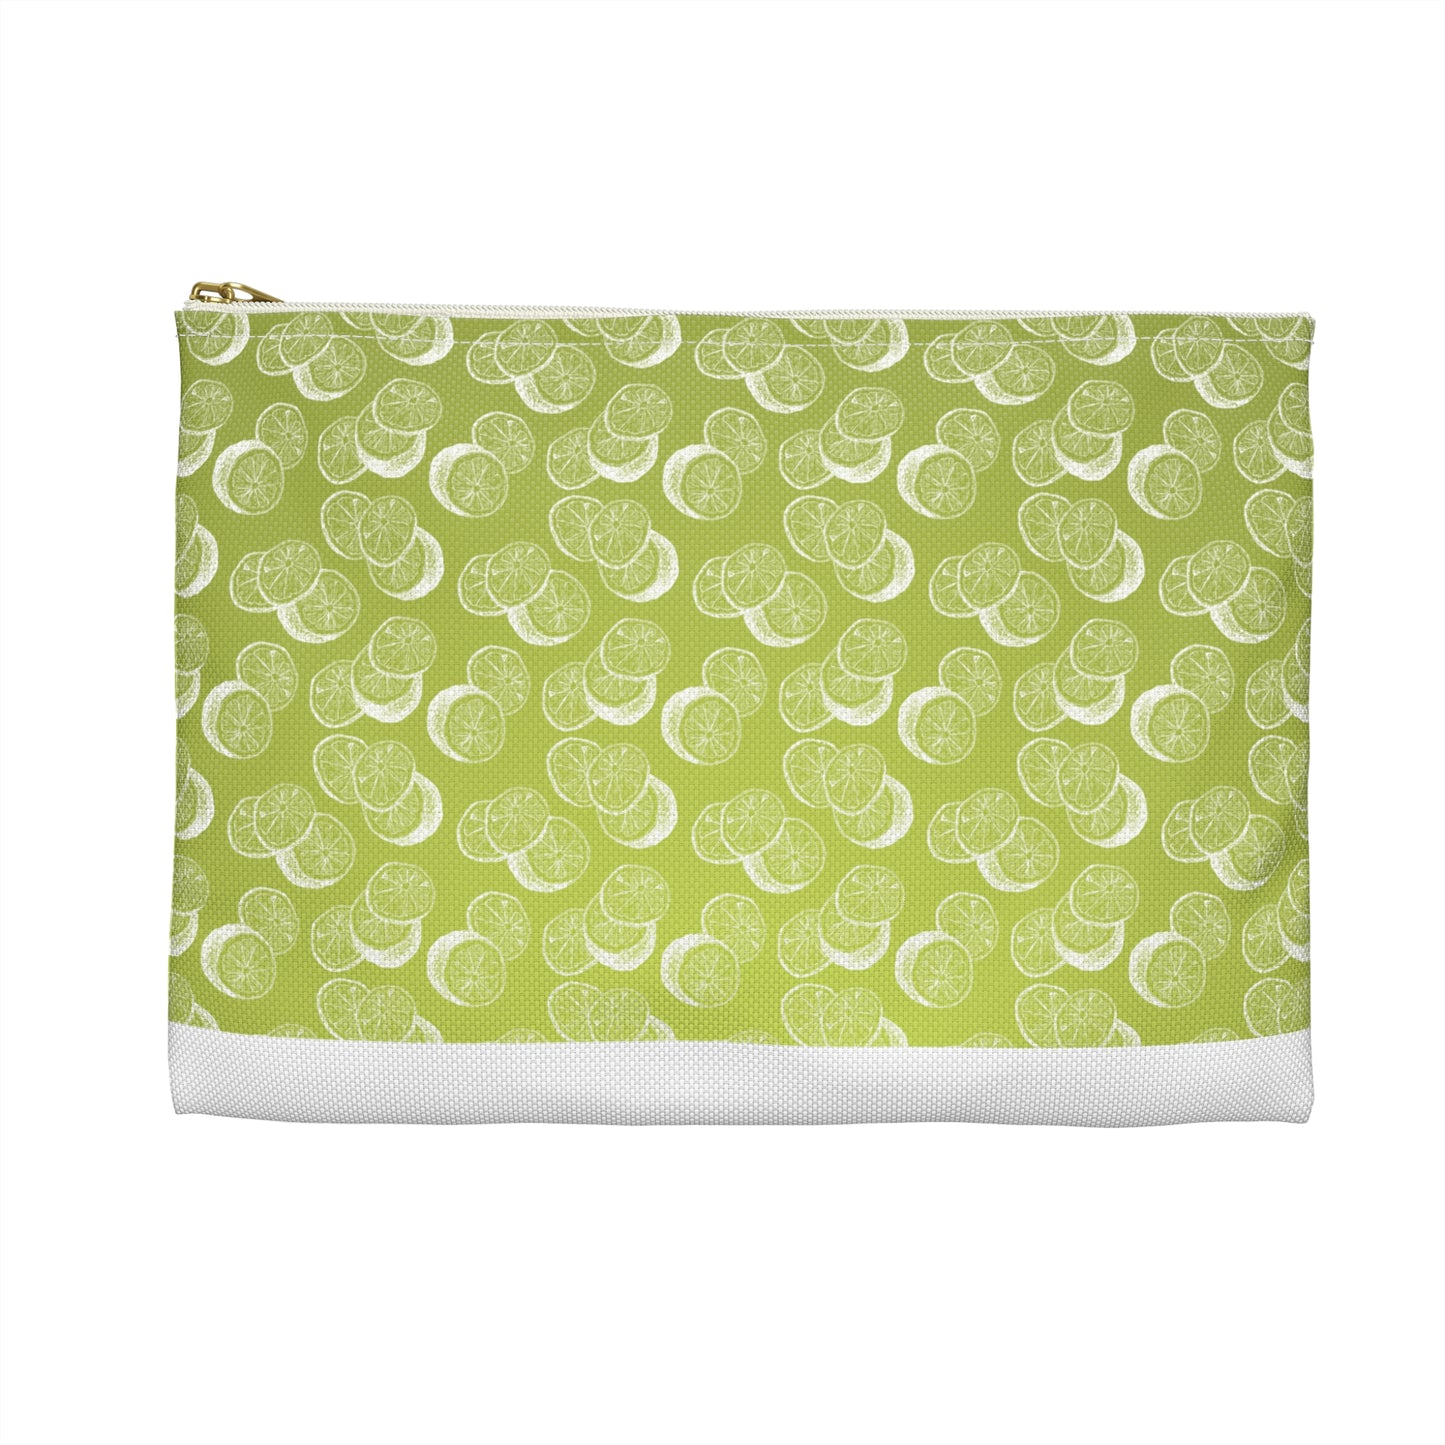 Juicy Limes Accessory Pouch